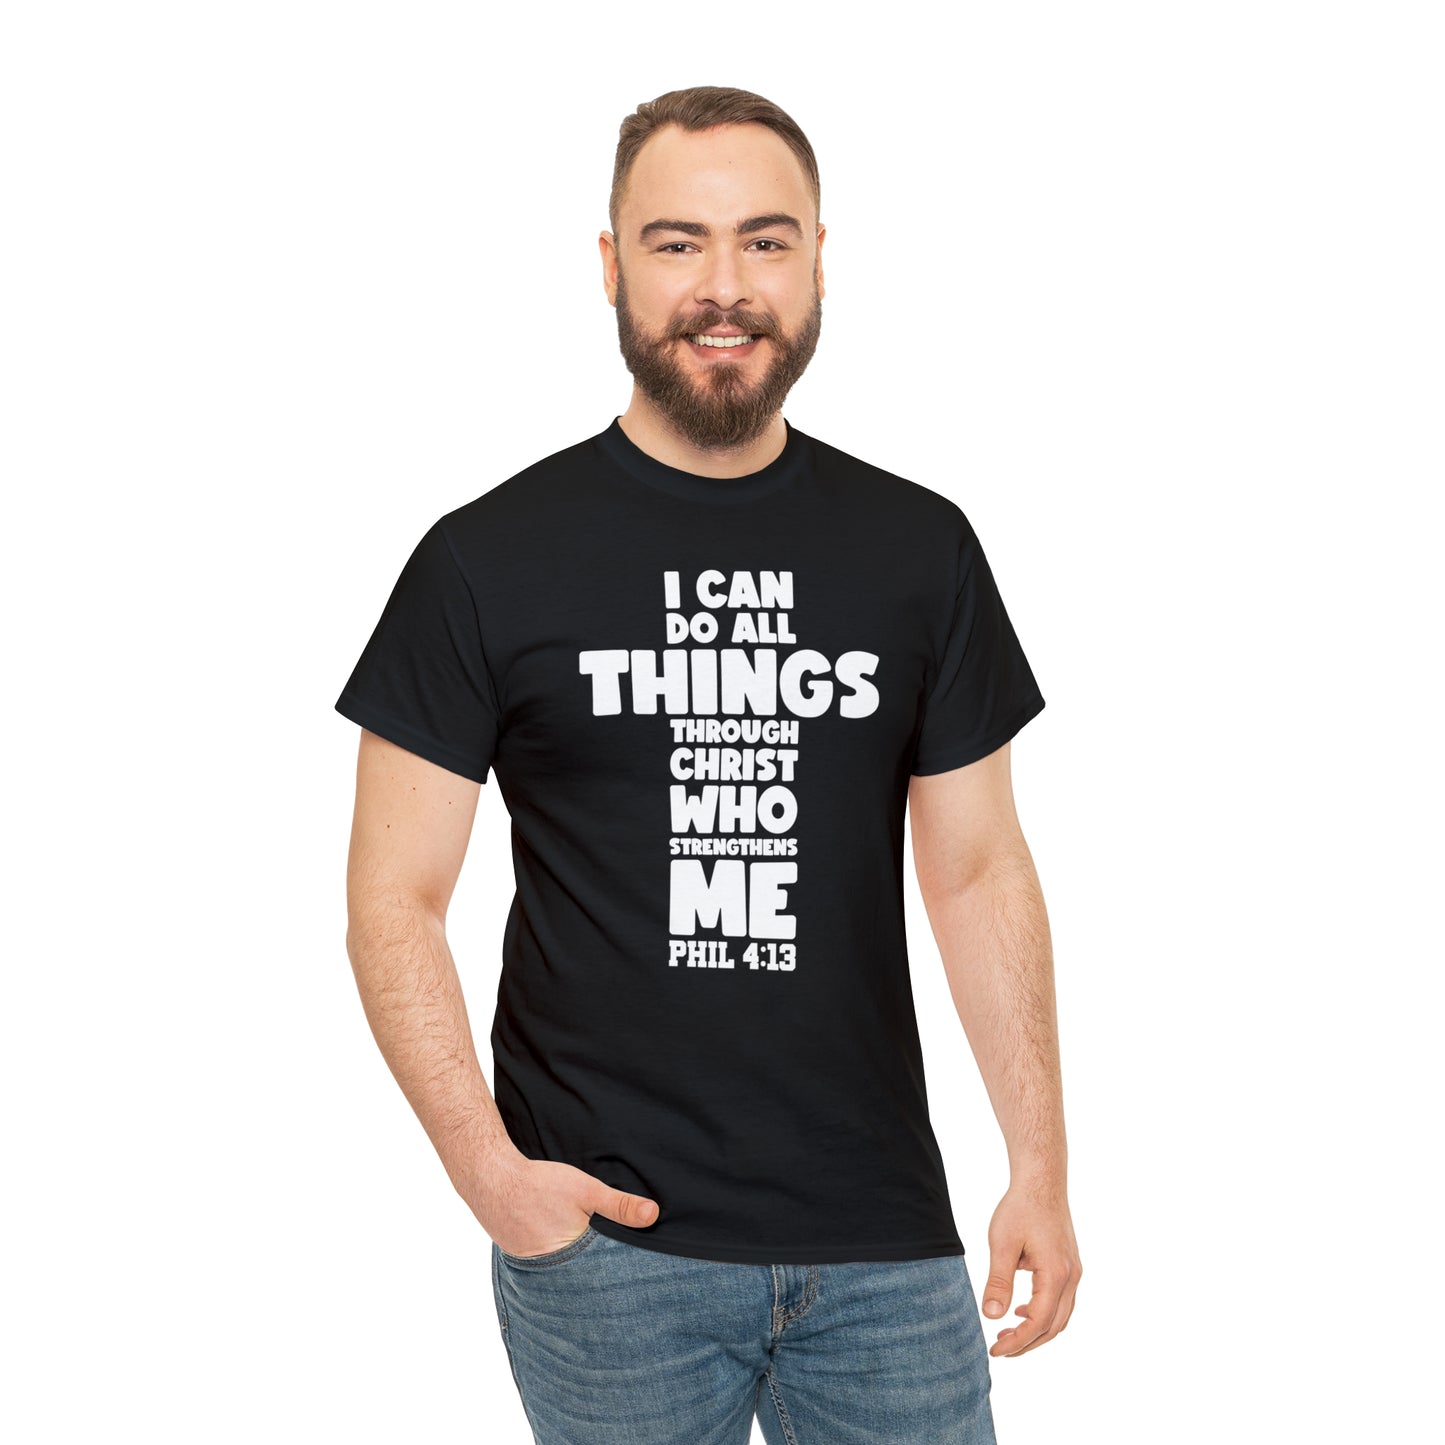 I CAN DO THINGS THROUGH CHRIST WHO STRENGTHENS ME - DRK TEE